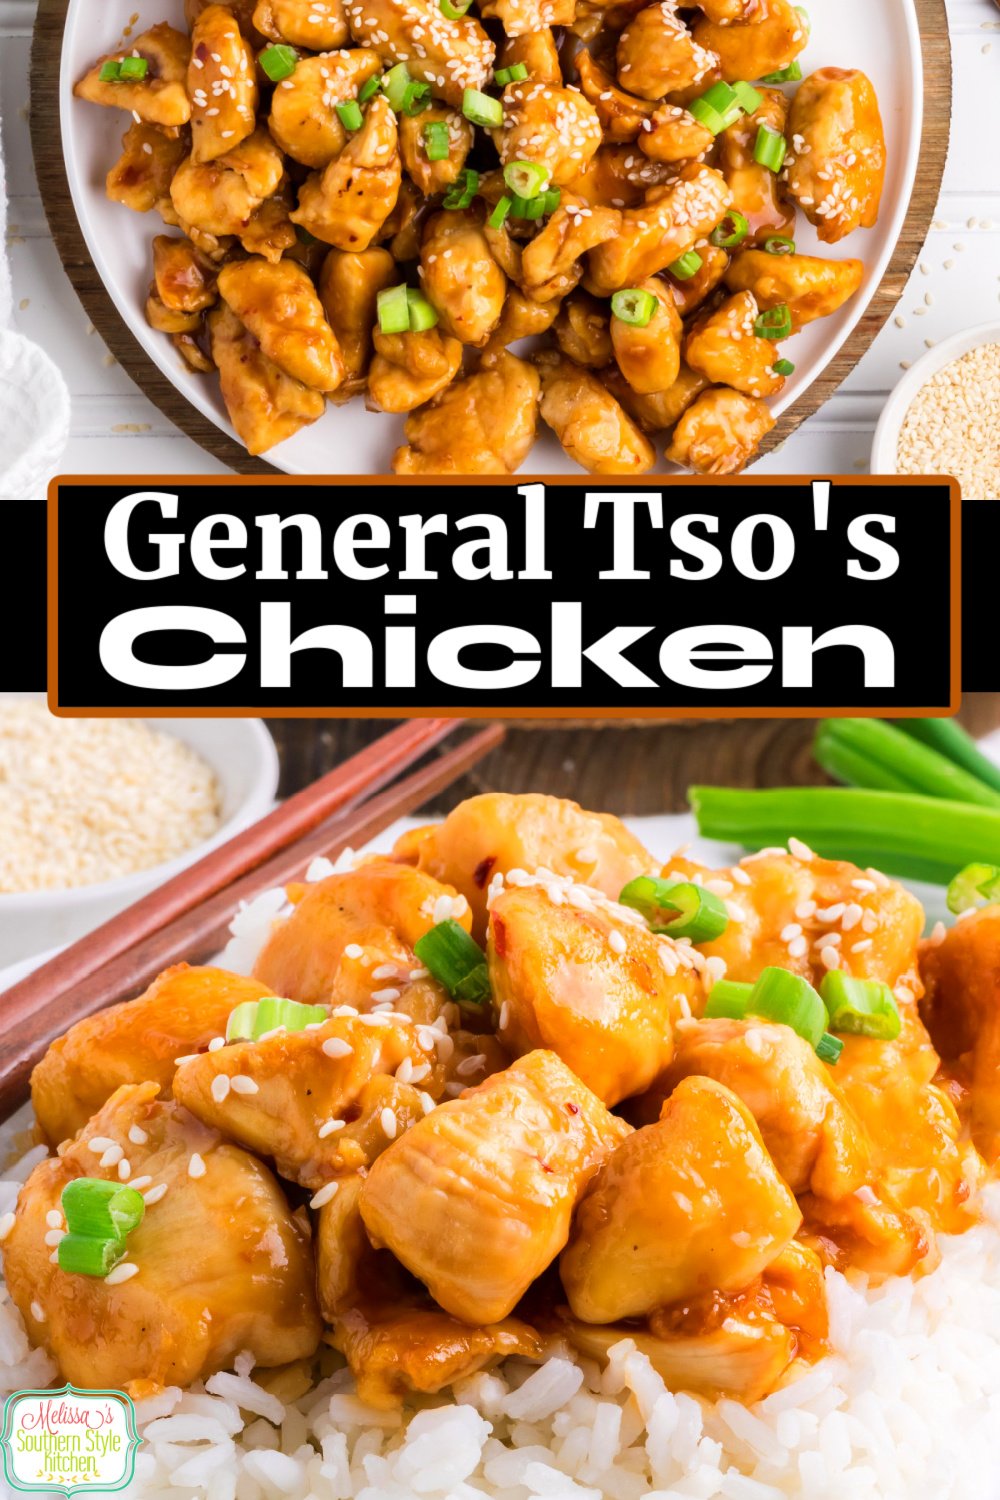 You'll save money and time when you make this delectable General Tso's Chicken over jasmine rice at home. #generaltsoschicken #easychickenrecipes #bestchickenrecipes #takoutrecipes #copycatgeneraltsos #asianrecipes via @melissasssk